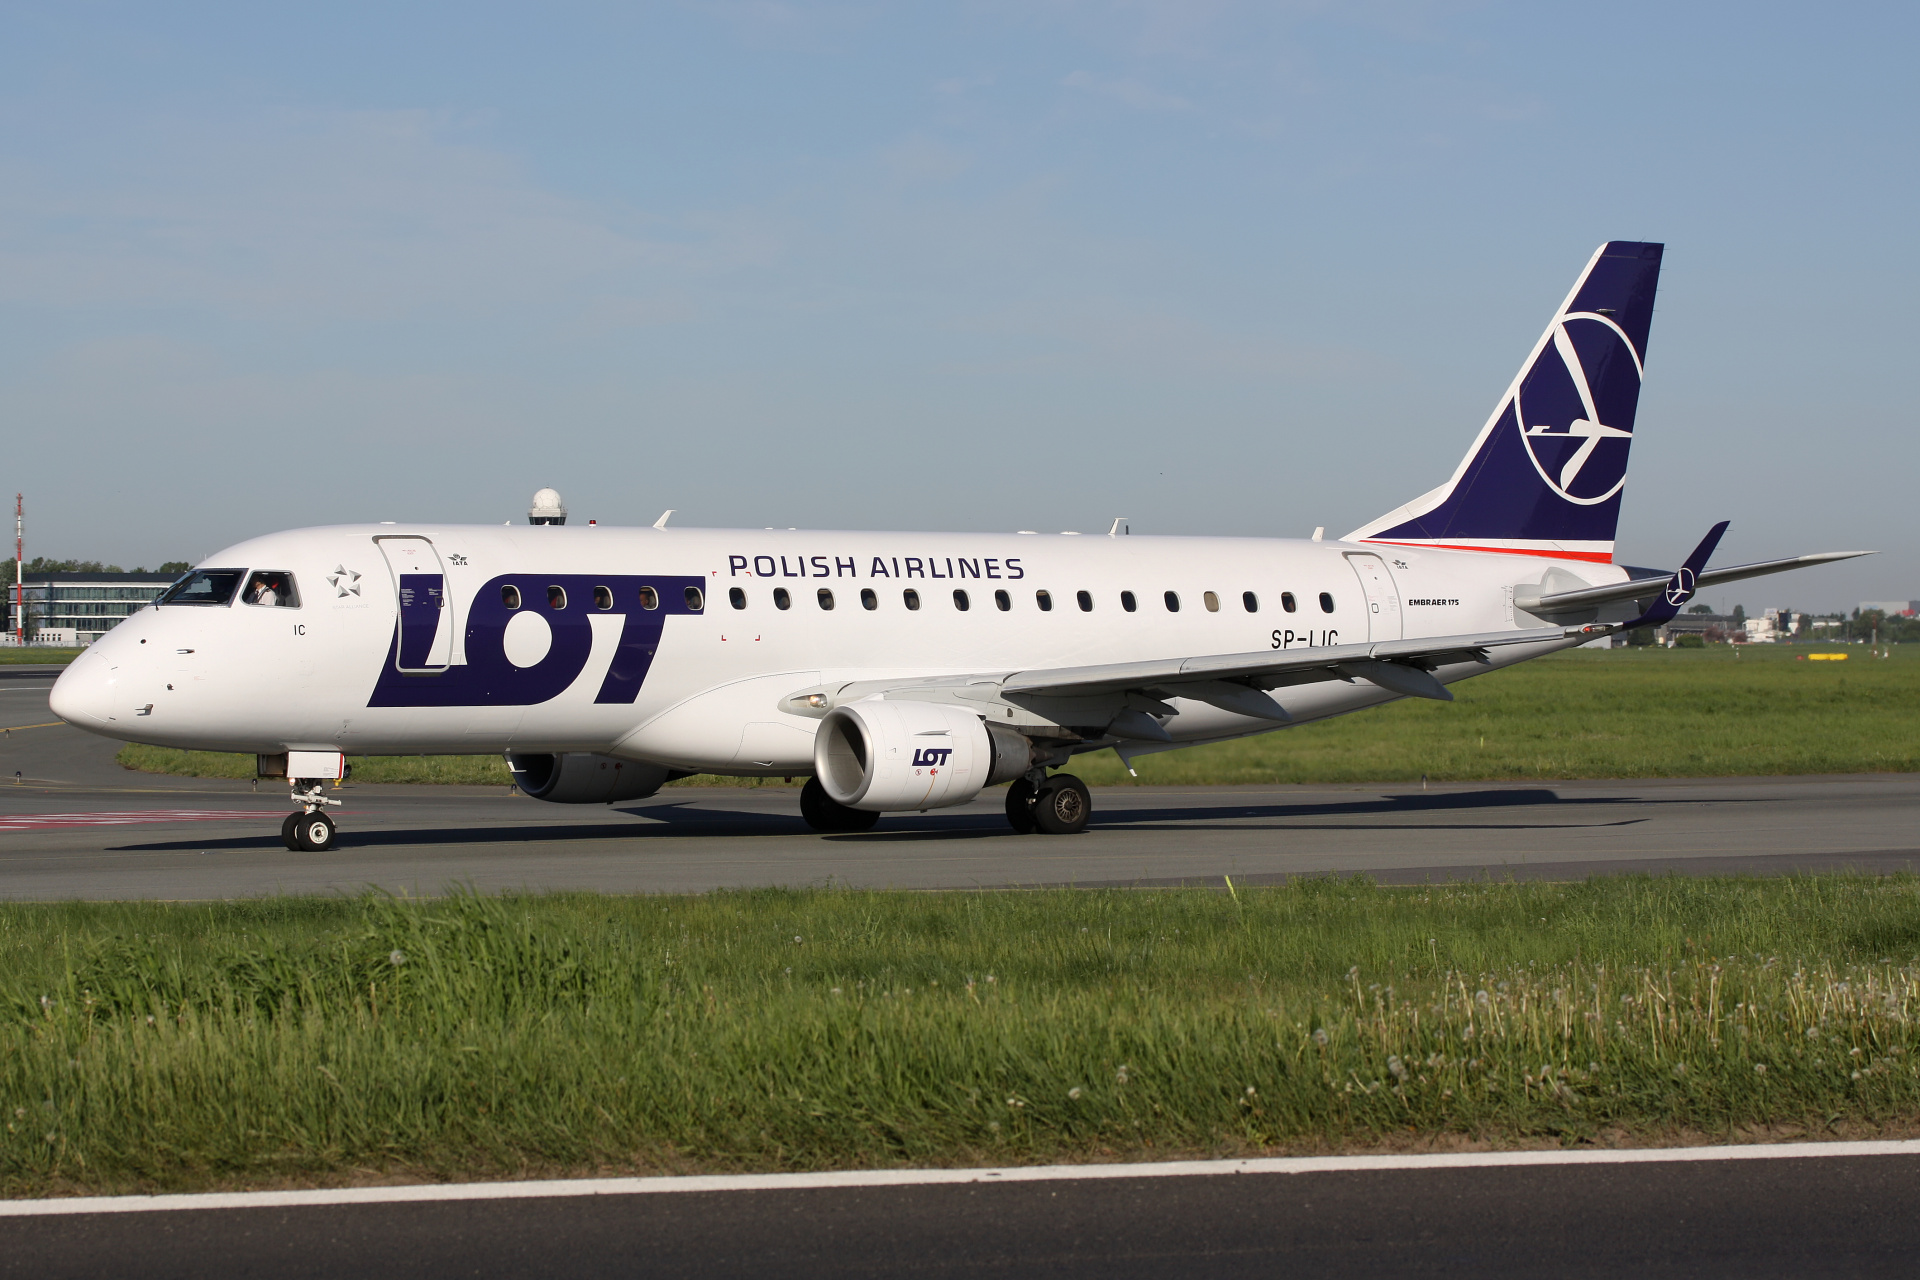 SP-LIC (new livery) (Aircraft » EPWA Spotting » Embraer E175 » LOT Polish Airlines)